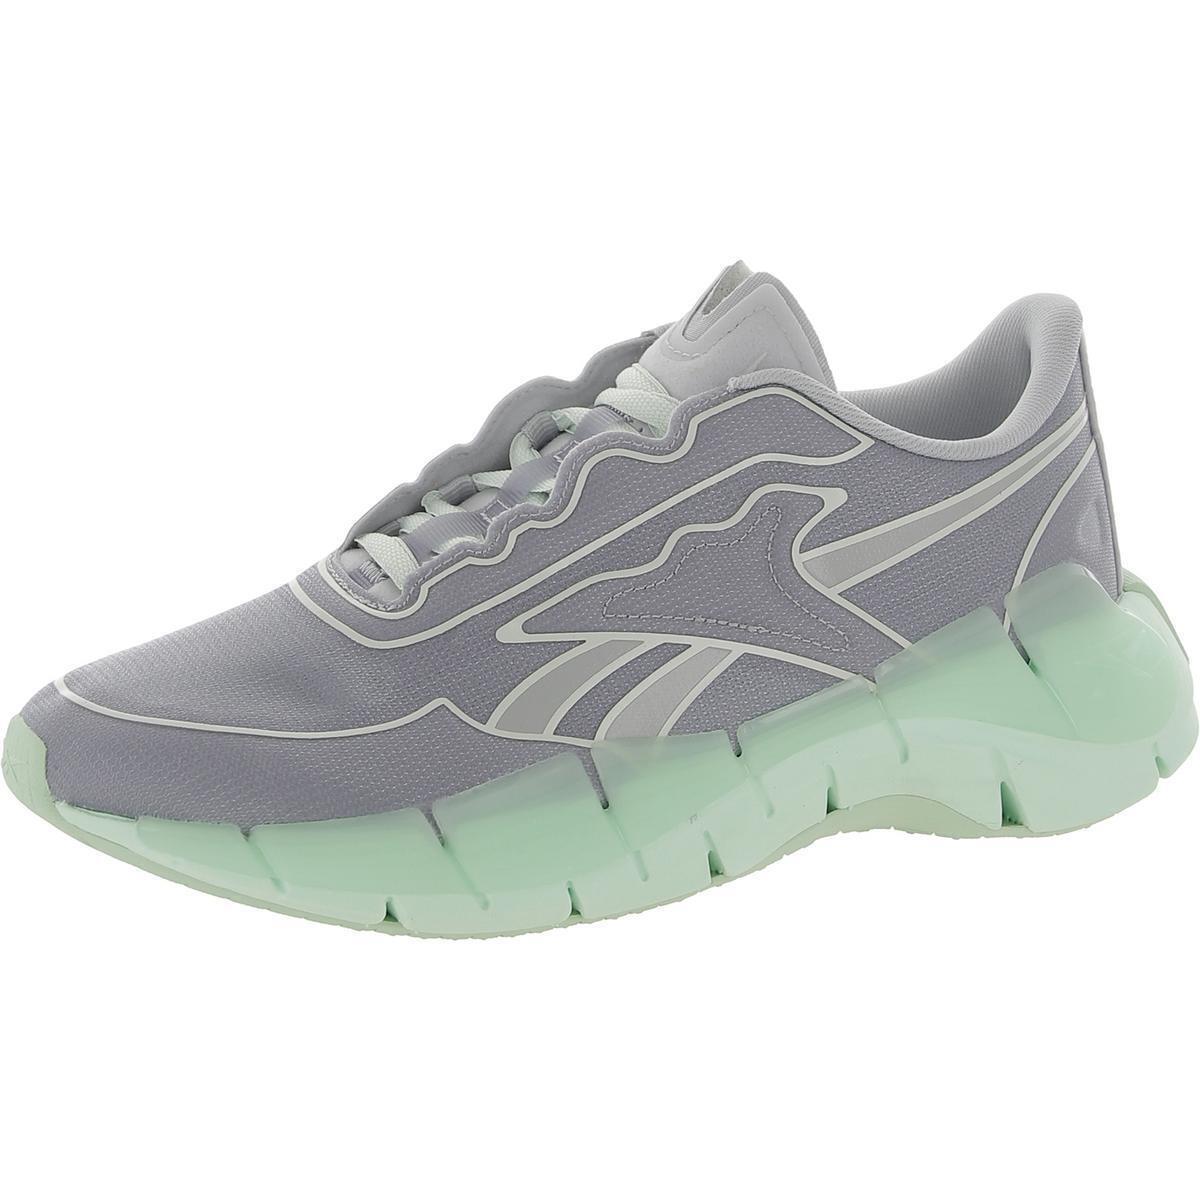 Reebok Womens Fitness Performance Trainers Running Shoes Sneakers Bhfo 5296